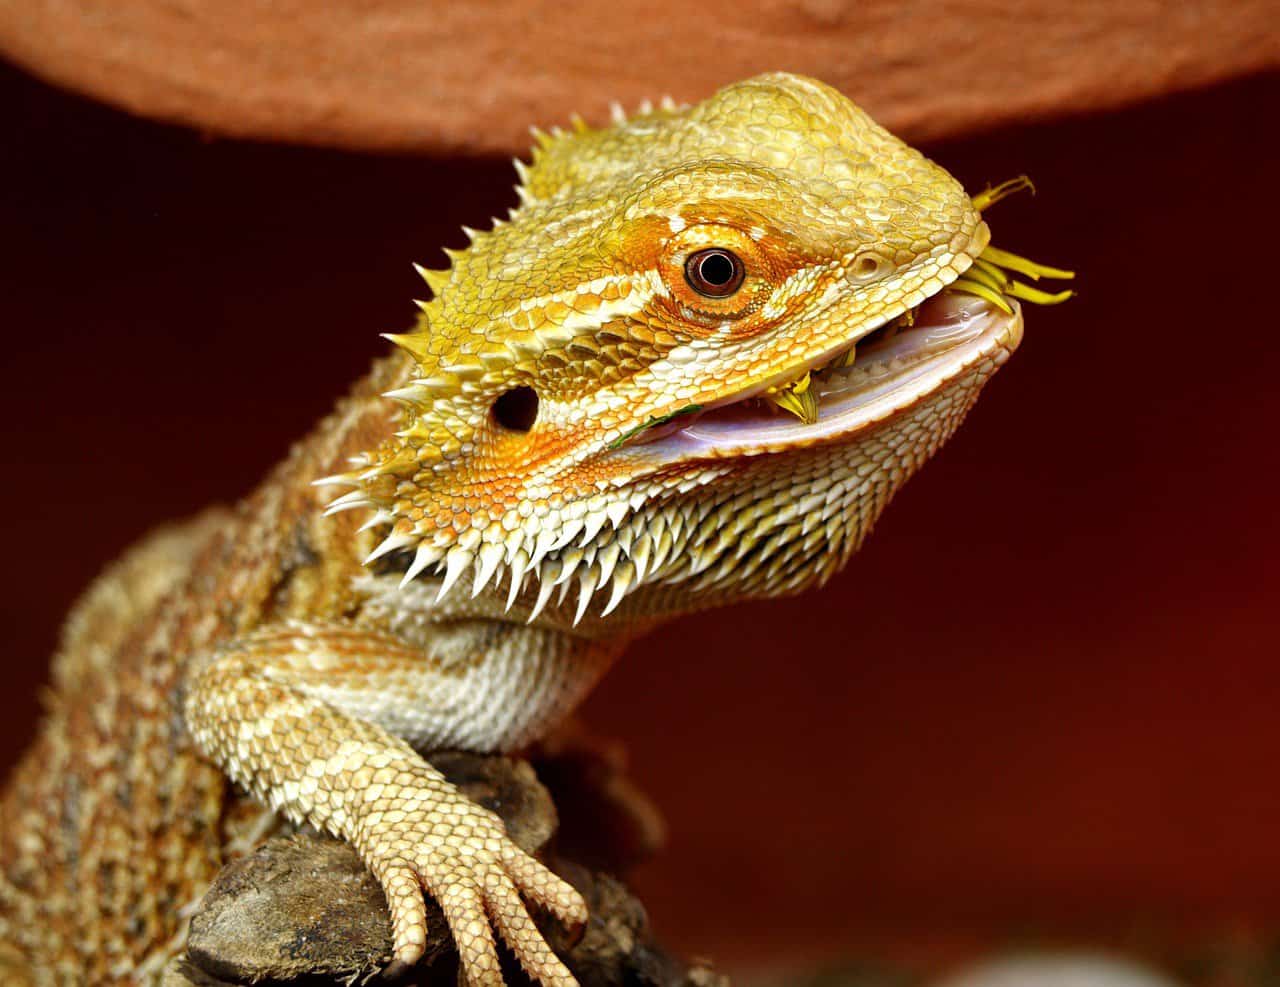 The Complete Bearded Dragon Diet – Eating habits